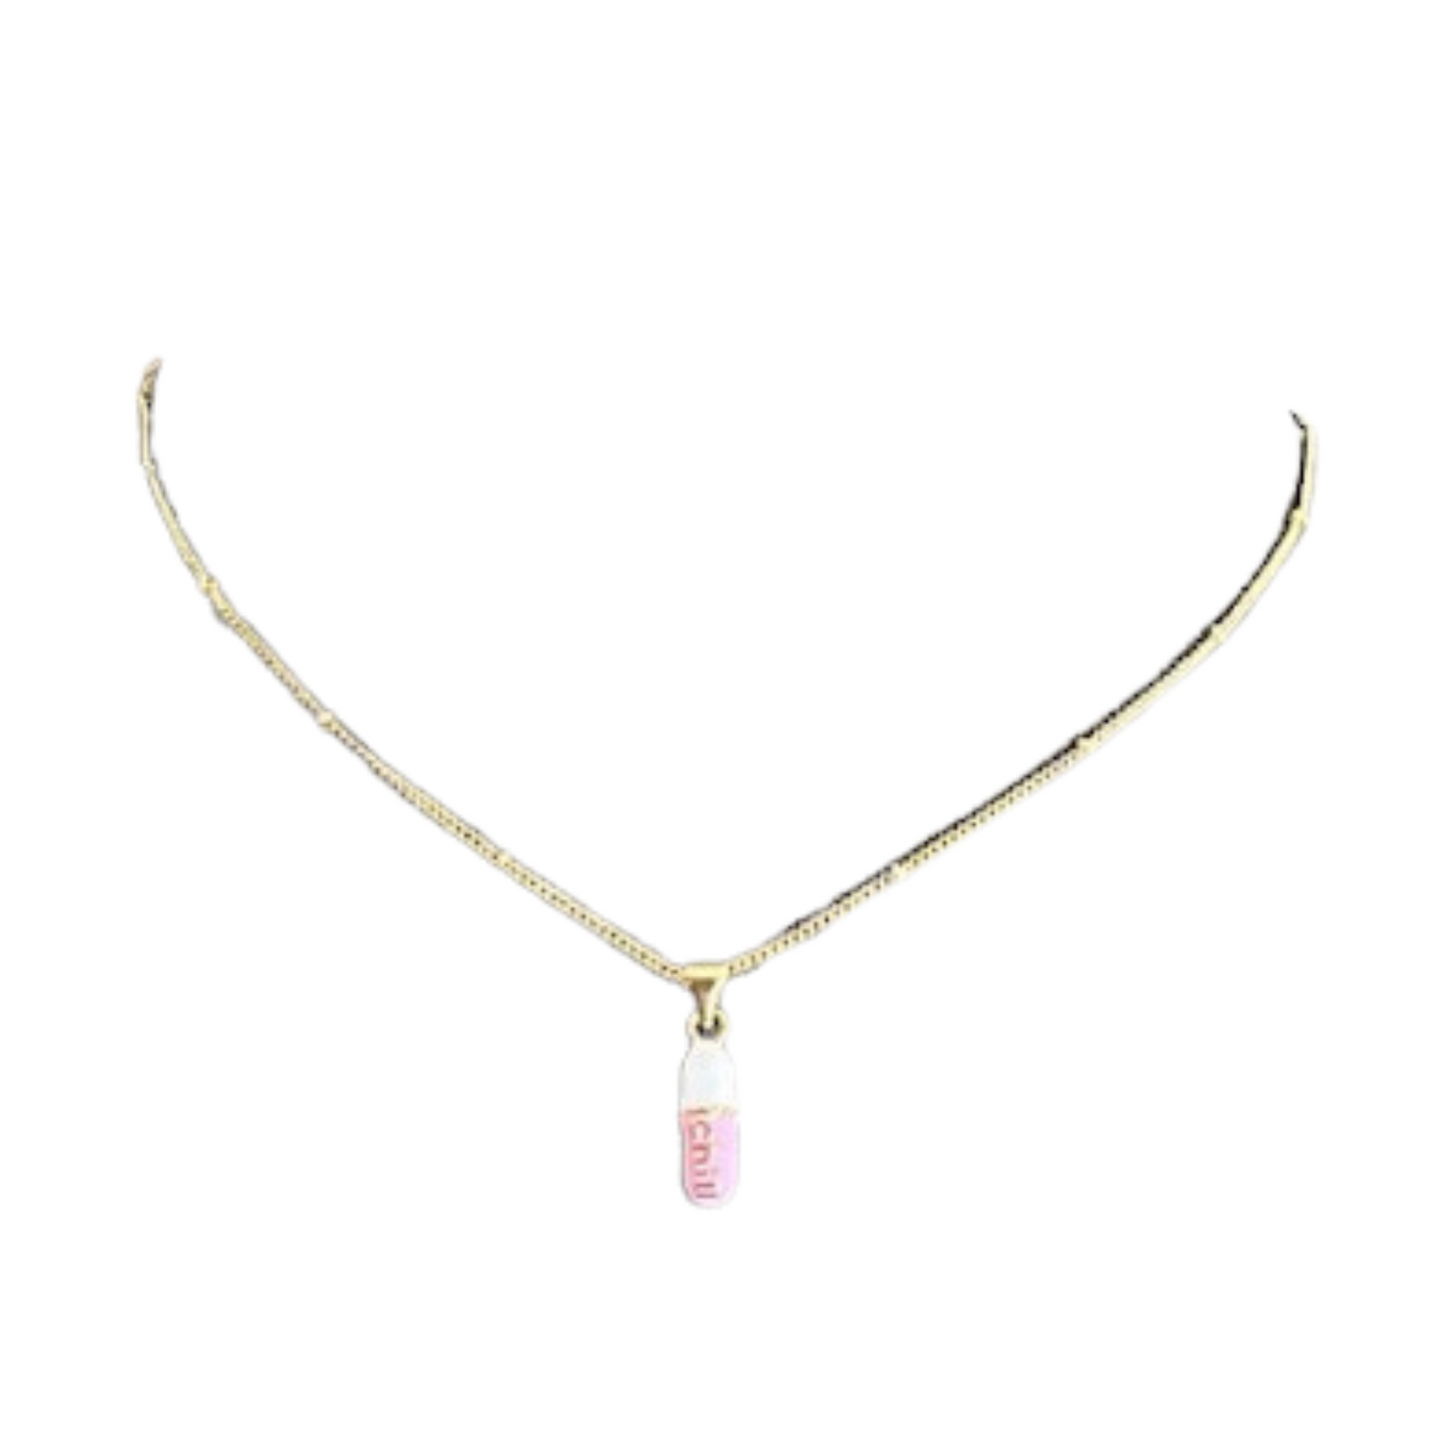 Chill pill necklace in pink